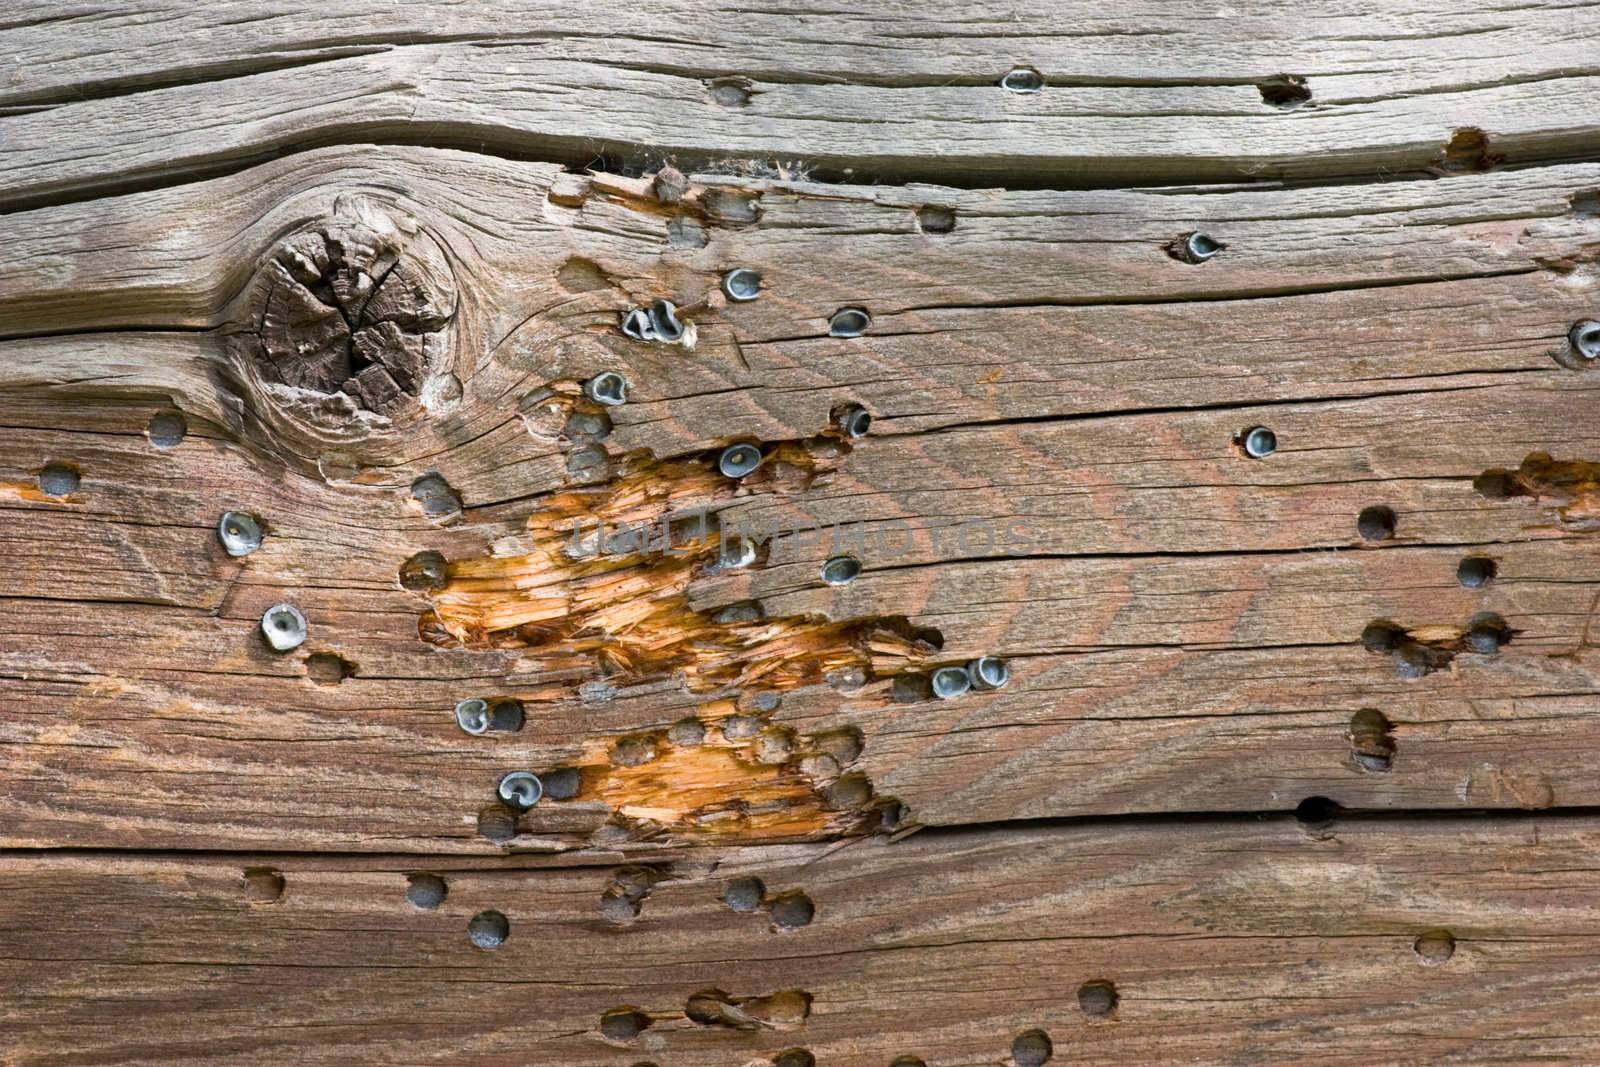 Airsoft gun bullet marks on weathered wooden wall